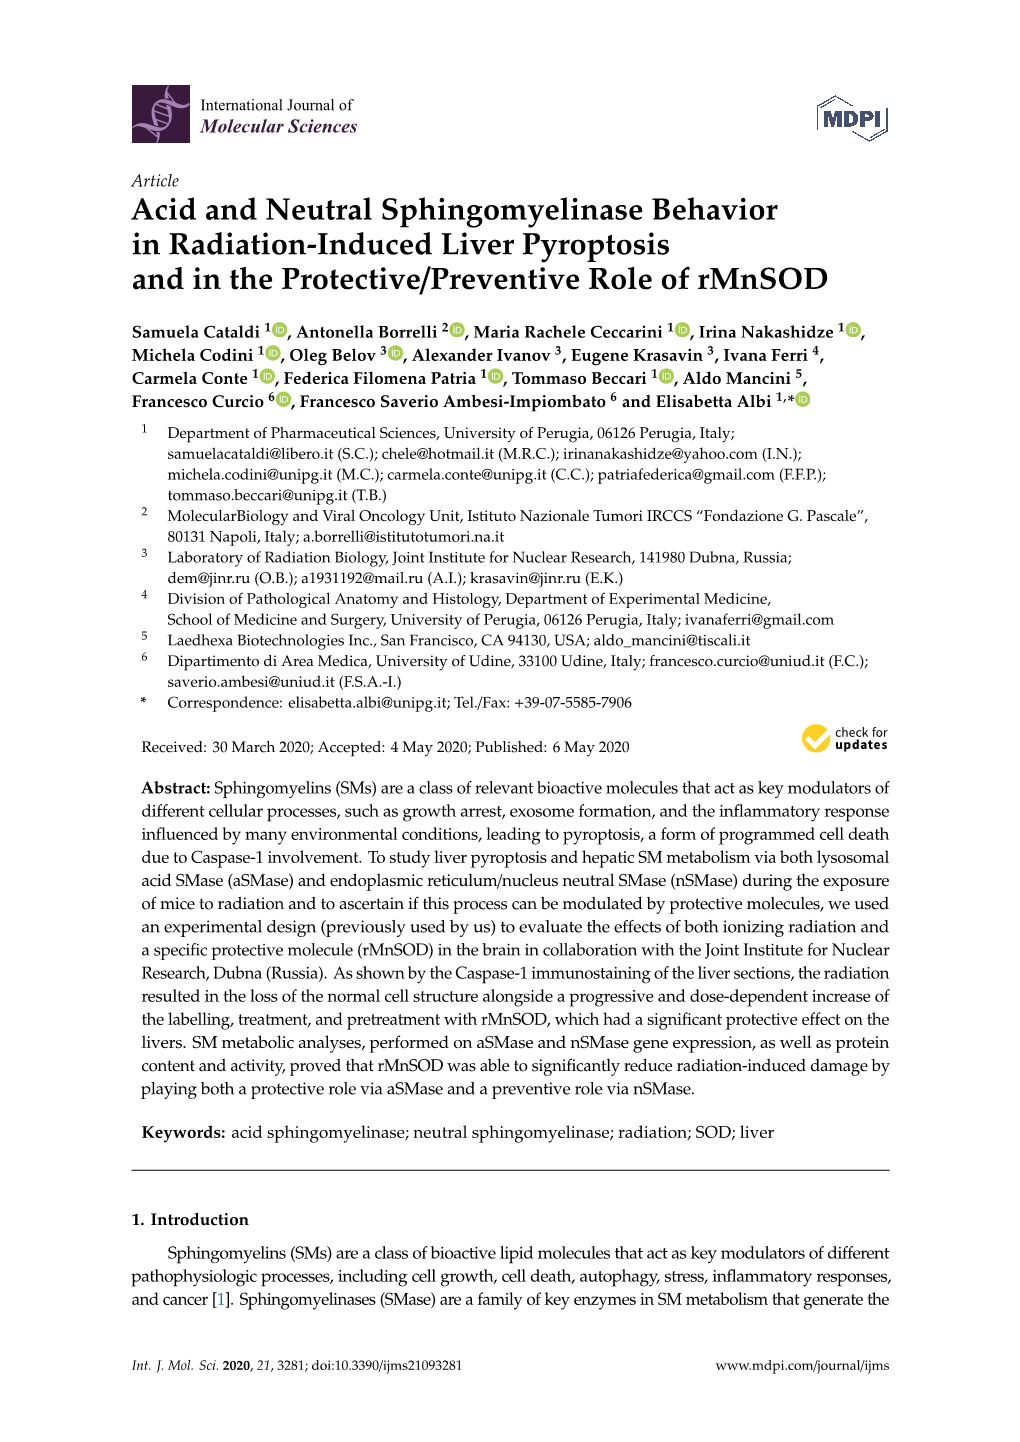 Acid and Neutral Sphingomyelinase Behavior in Radiation-Induced Liver Pyroptosis and in the Protective/Preventive Role of Rmnsod